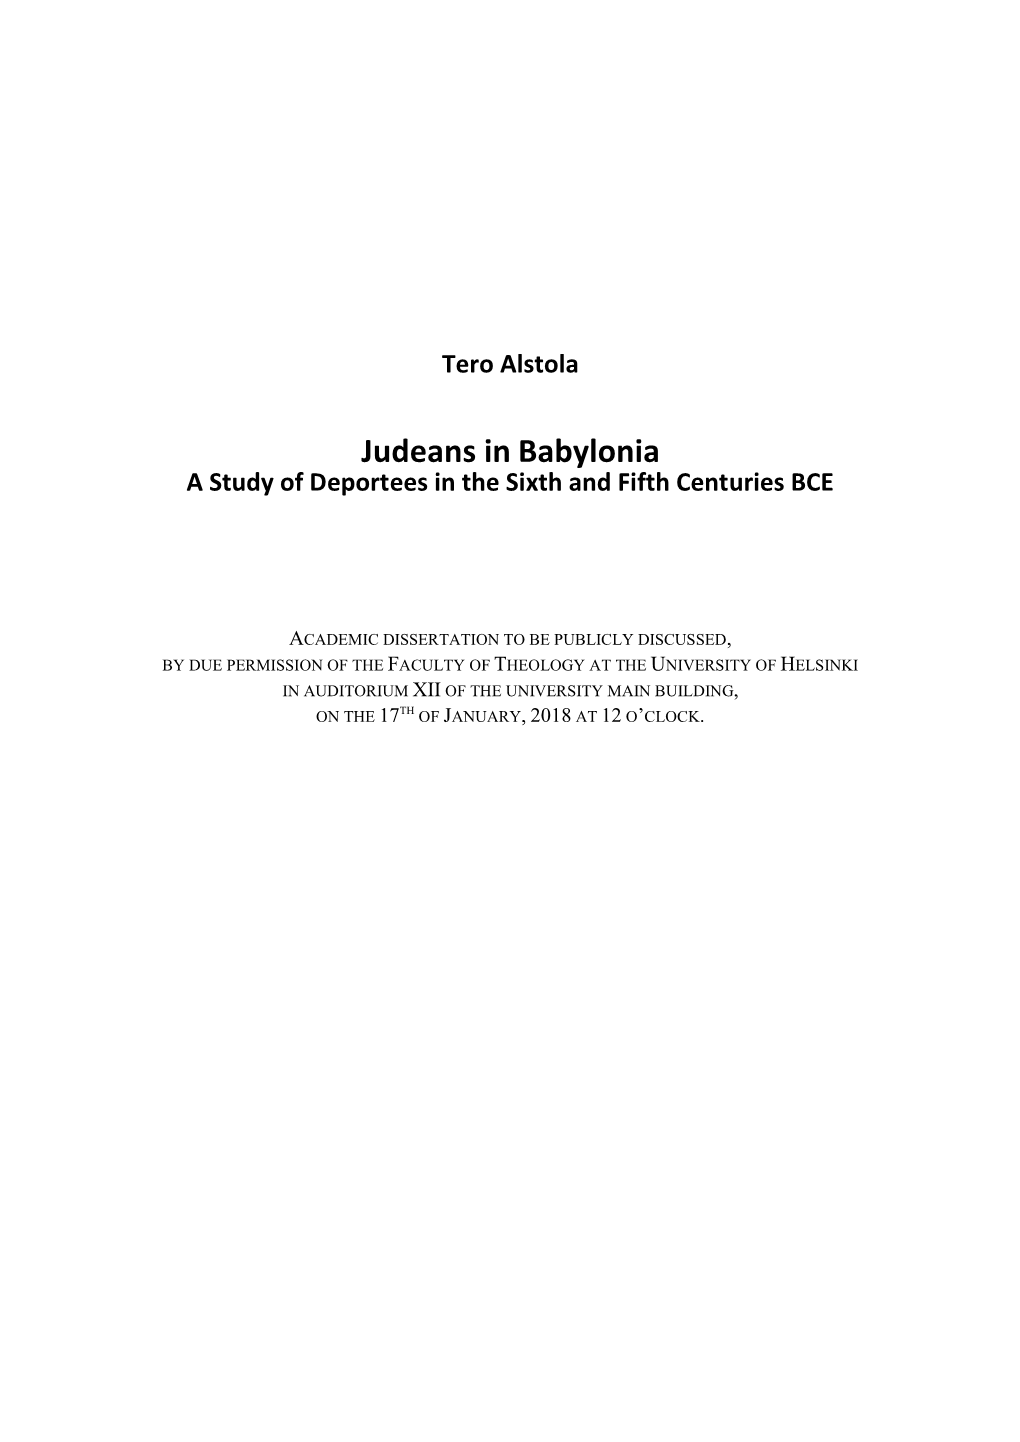 Judeans in Babylonia a Study of Deportees in the Sixth and Fifth Centuries BCE